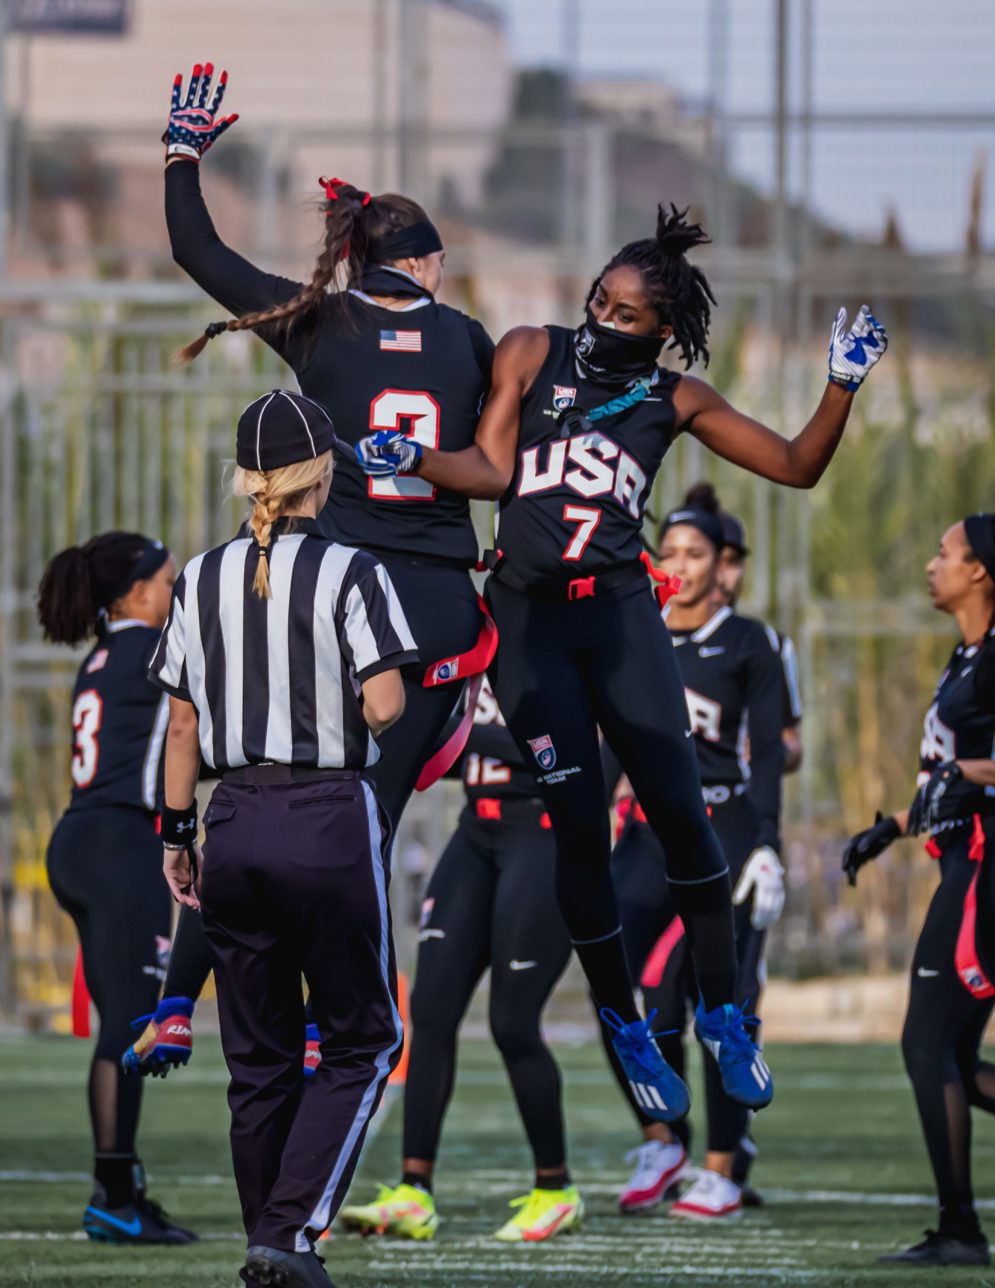 USA Football is the American governing body for both flag and tackle football. USA Football sponsors national teams at youth and adult levels &#x2014; leading player scouting, training, and development. Learn more about the U.S. National Football Team.&#xA0;